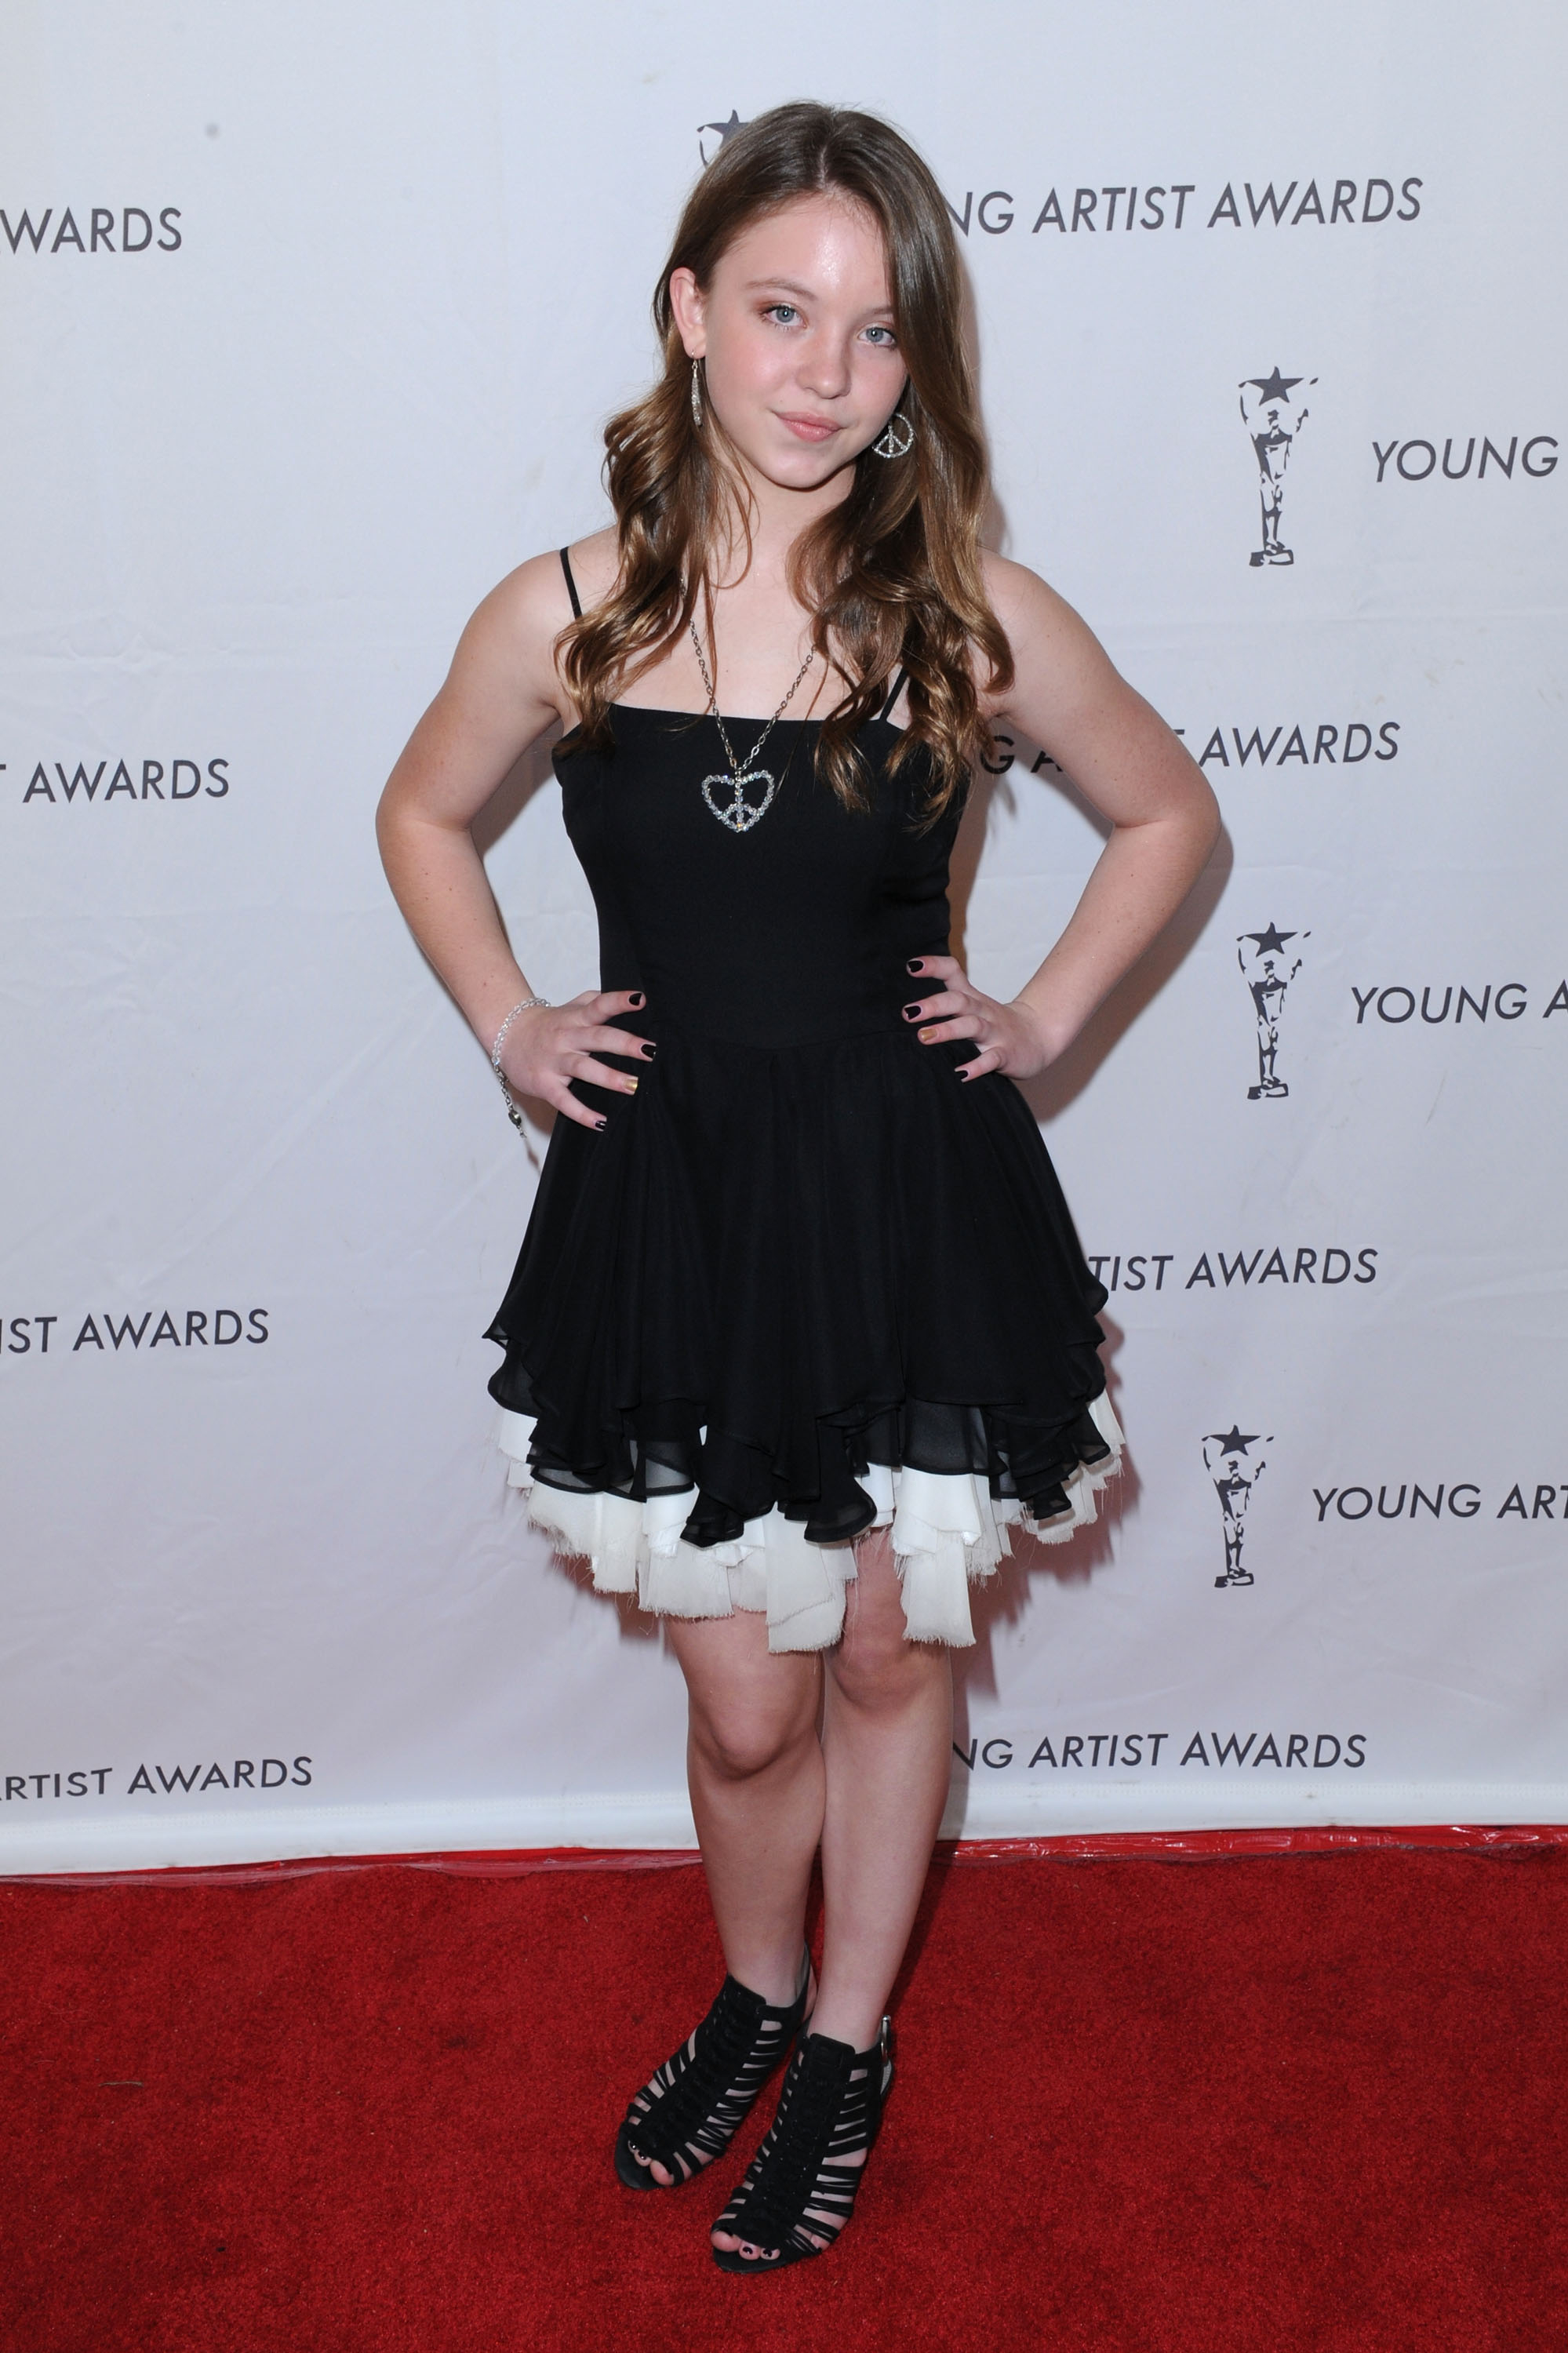 Sydney Sweeney at a red carpet event when she was younger